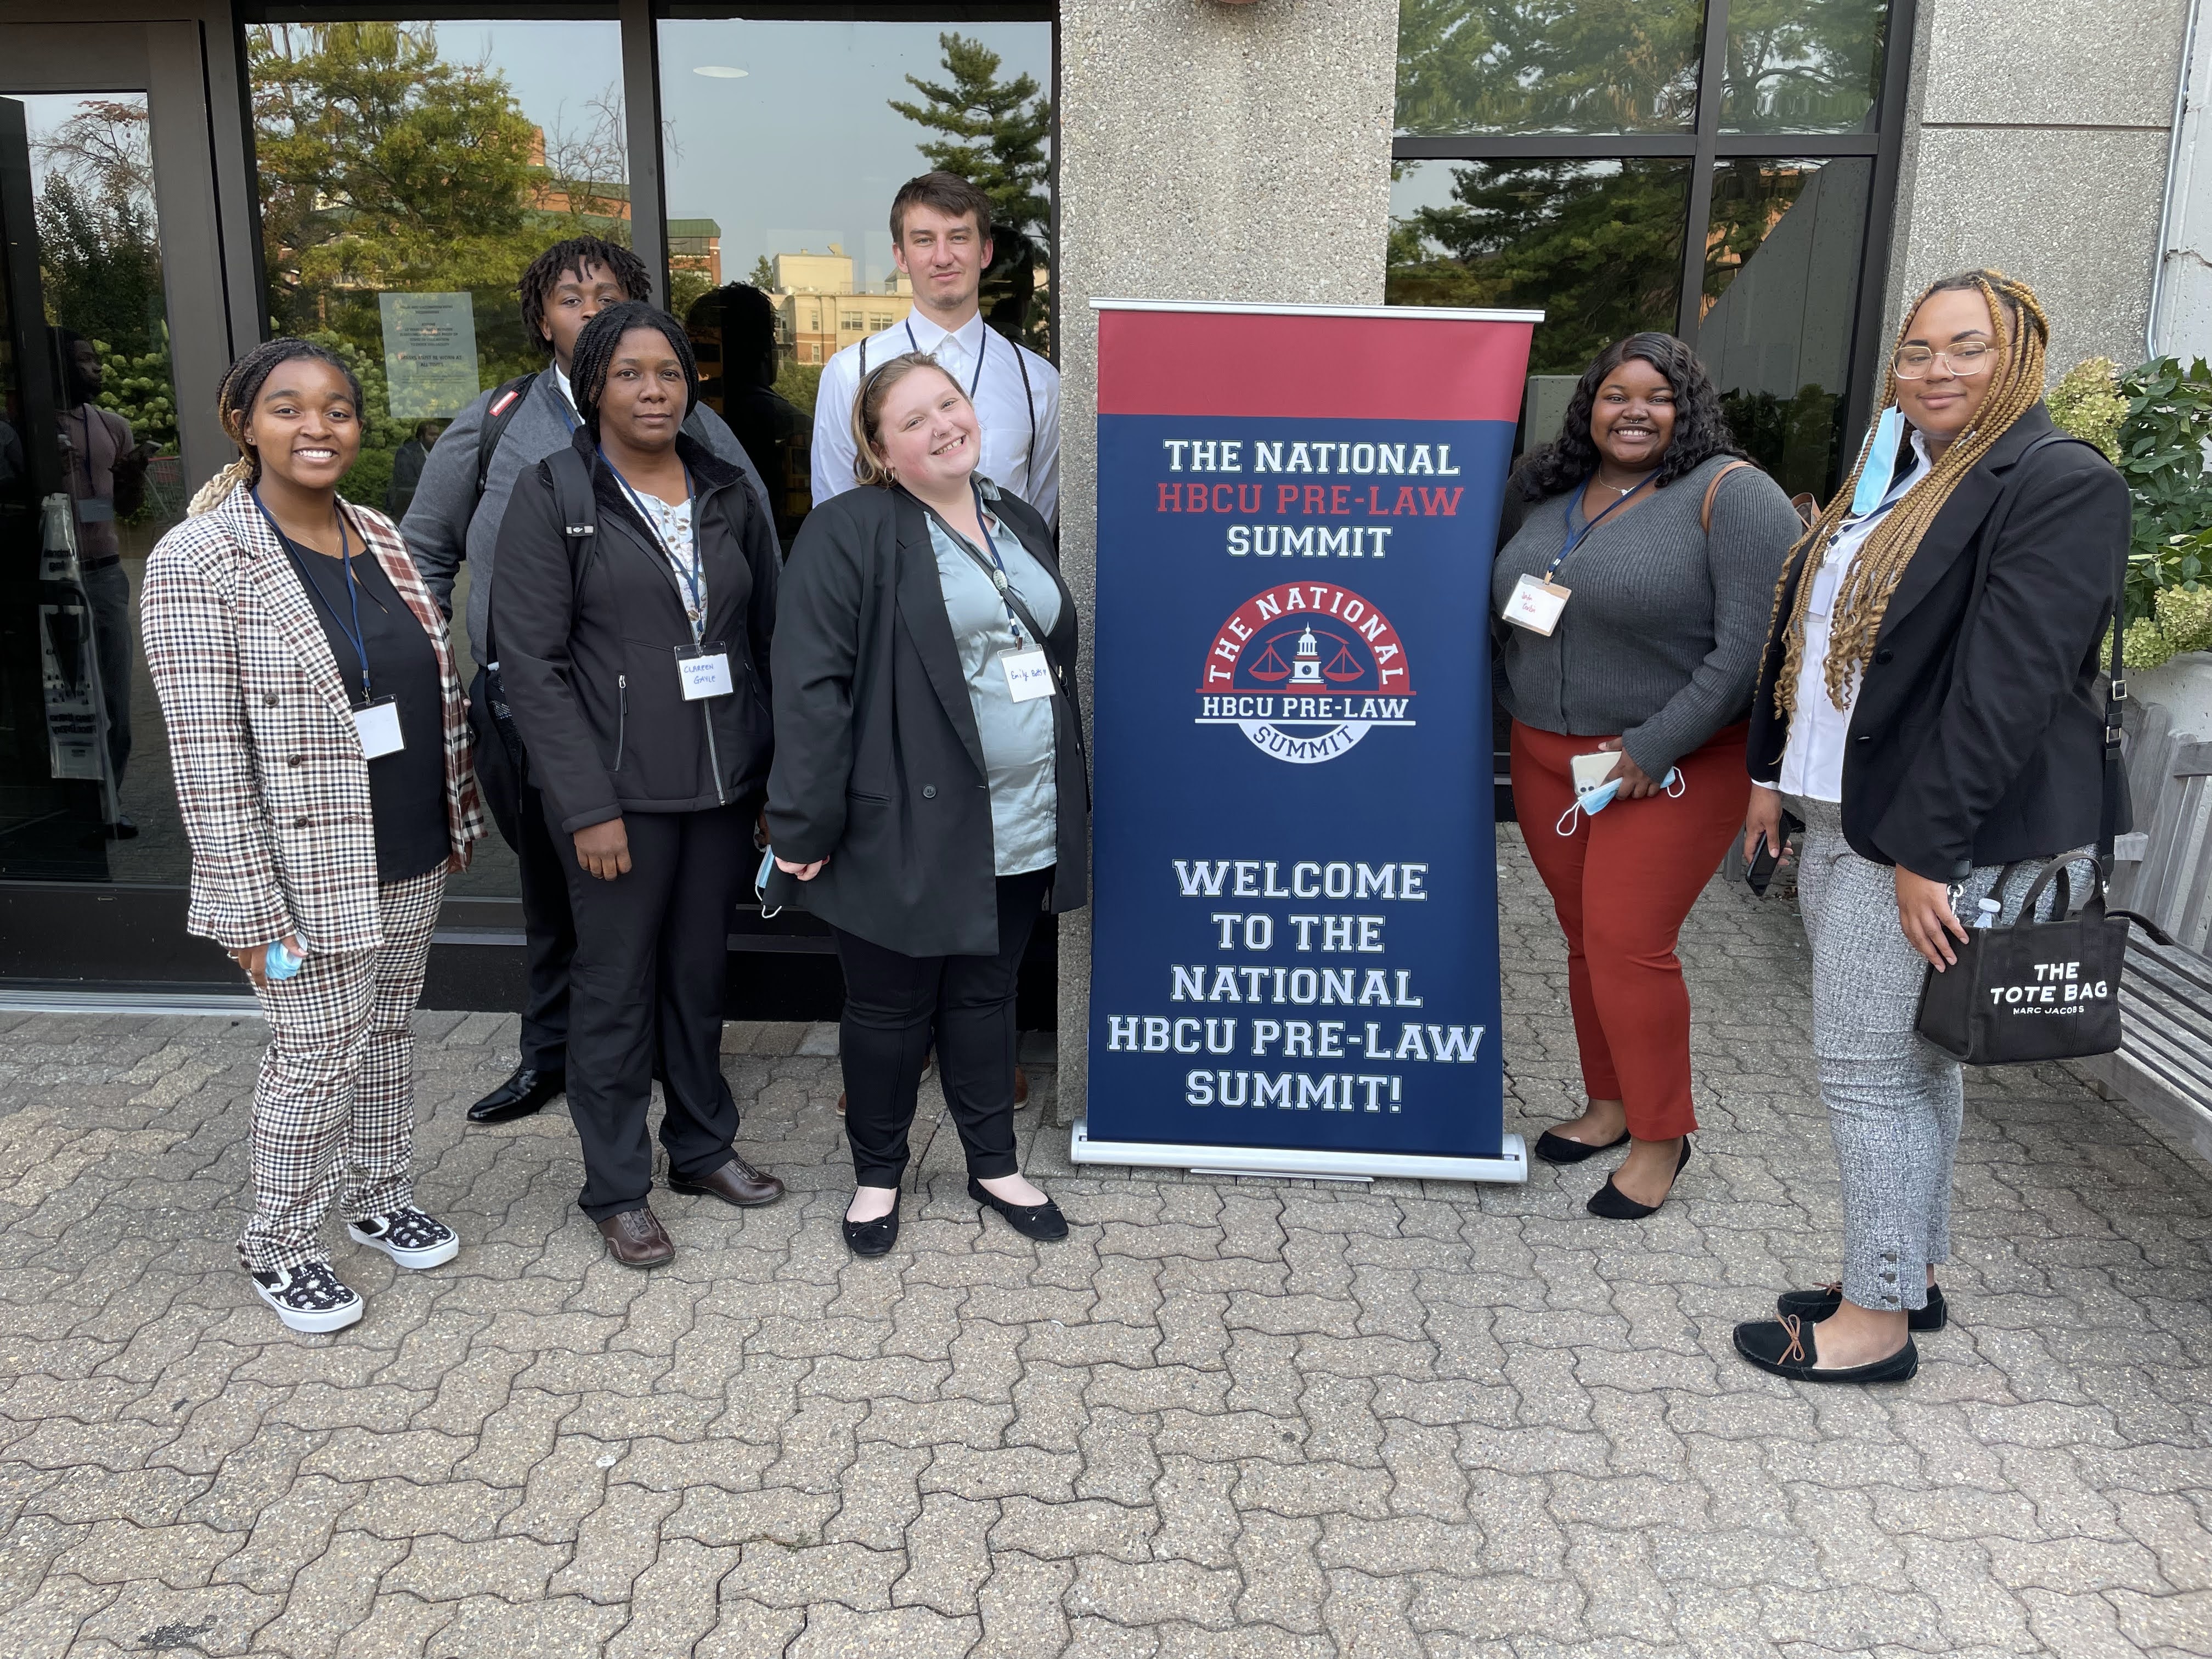 HBCU Pre-Law Summit attended by Lincoln University of Missouri students